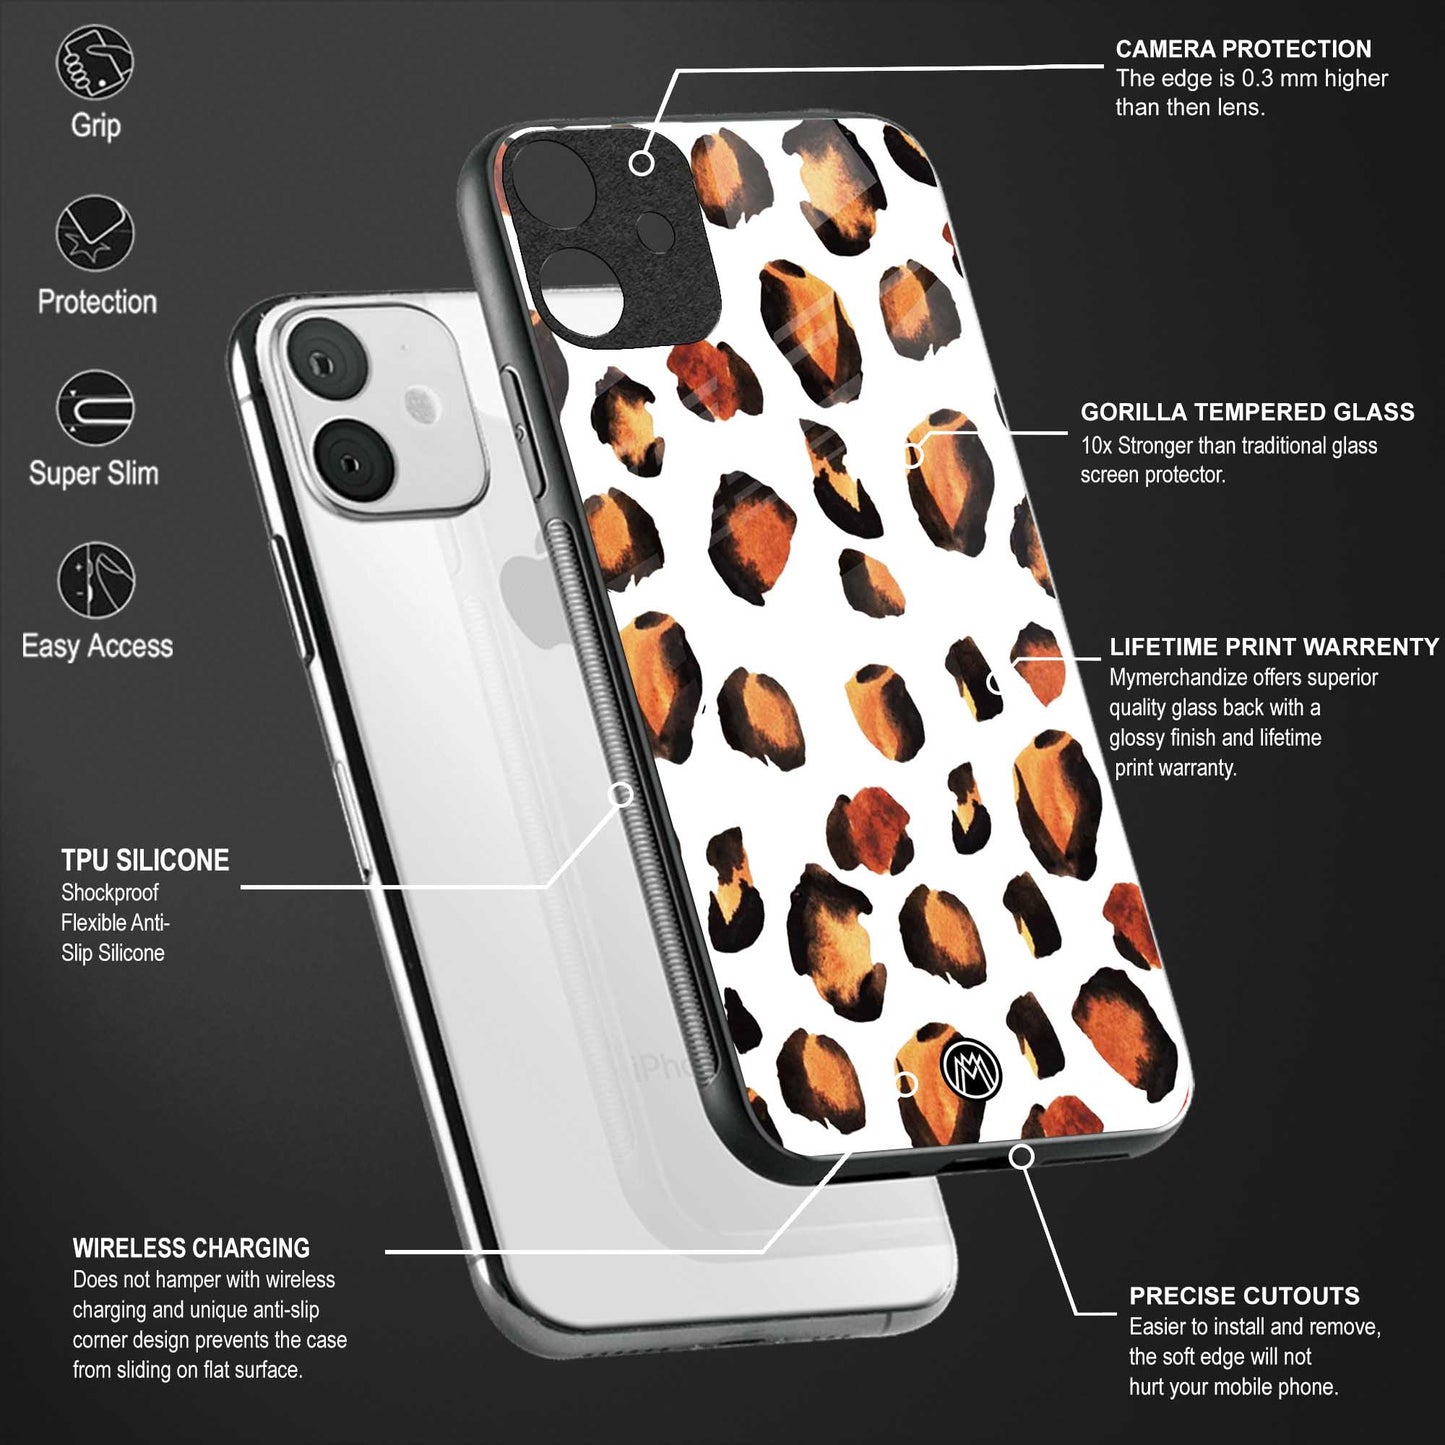 cheetah fur back phone cover | glass case for vivo y16